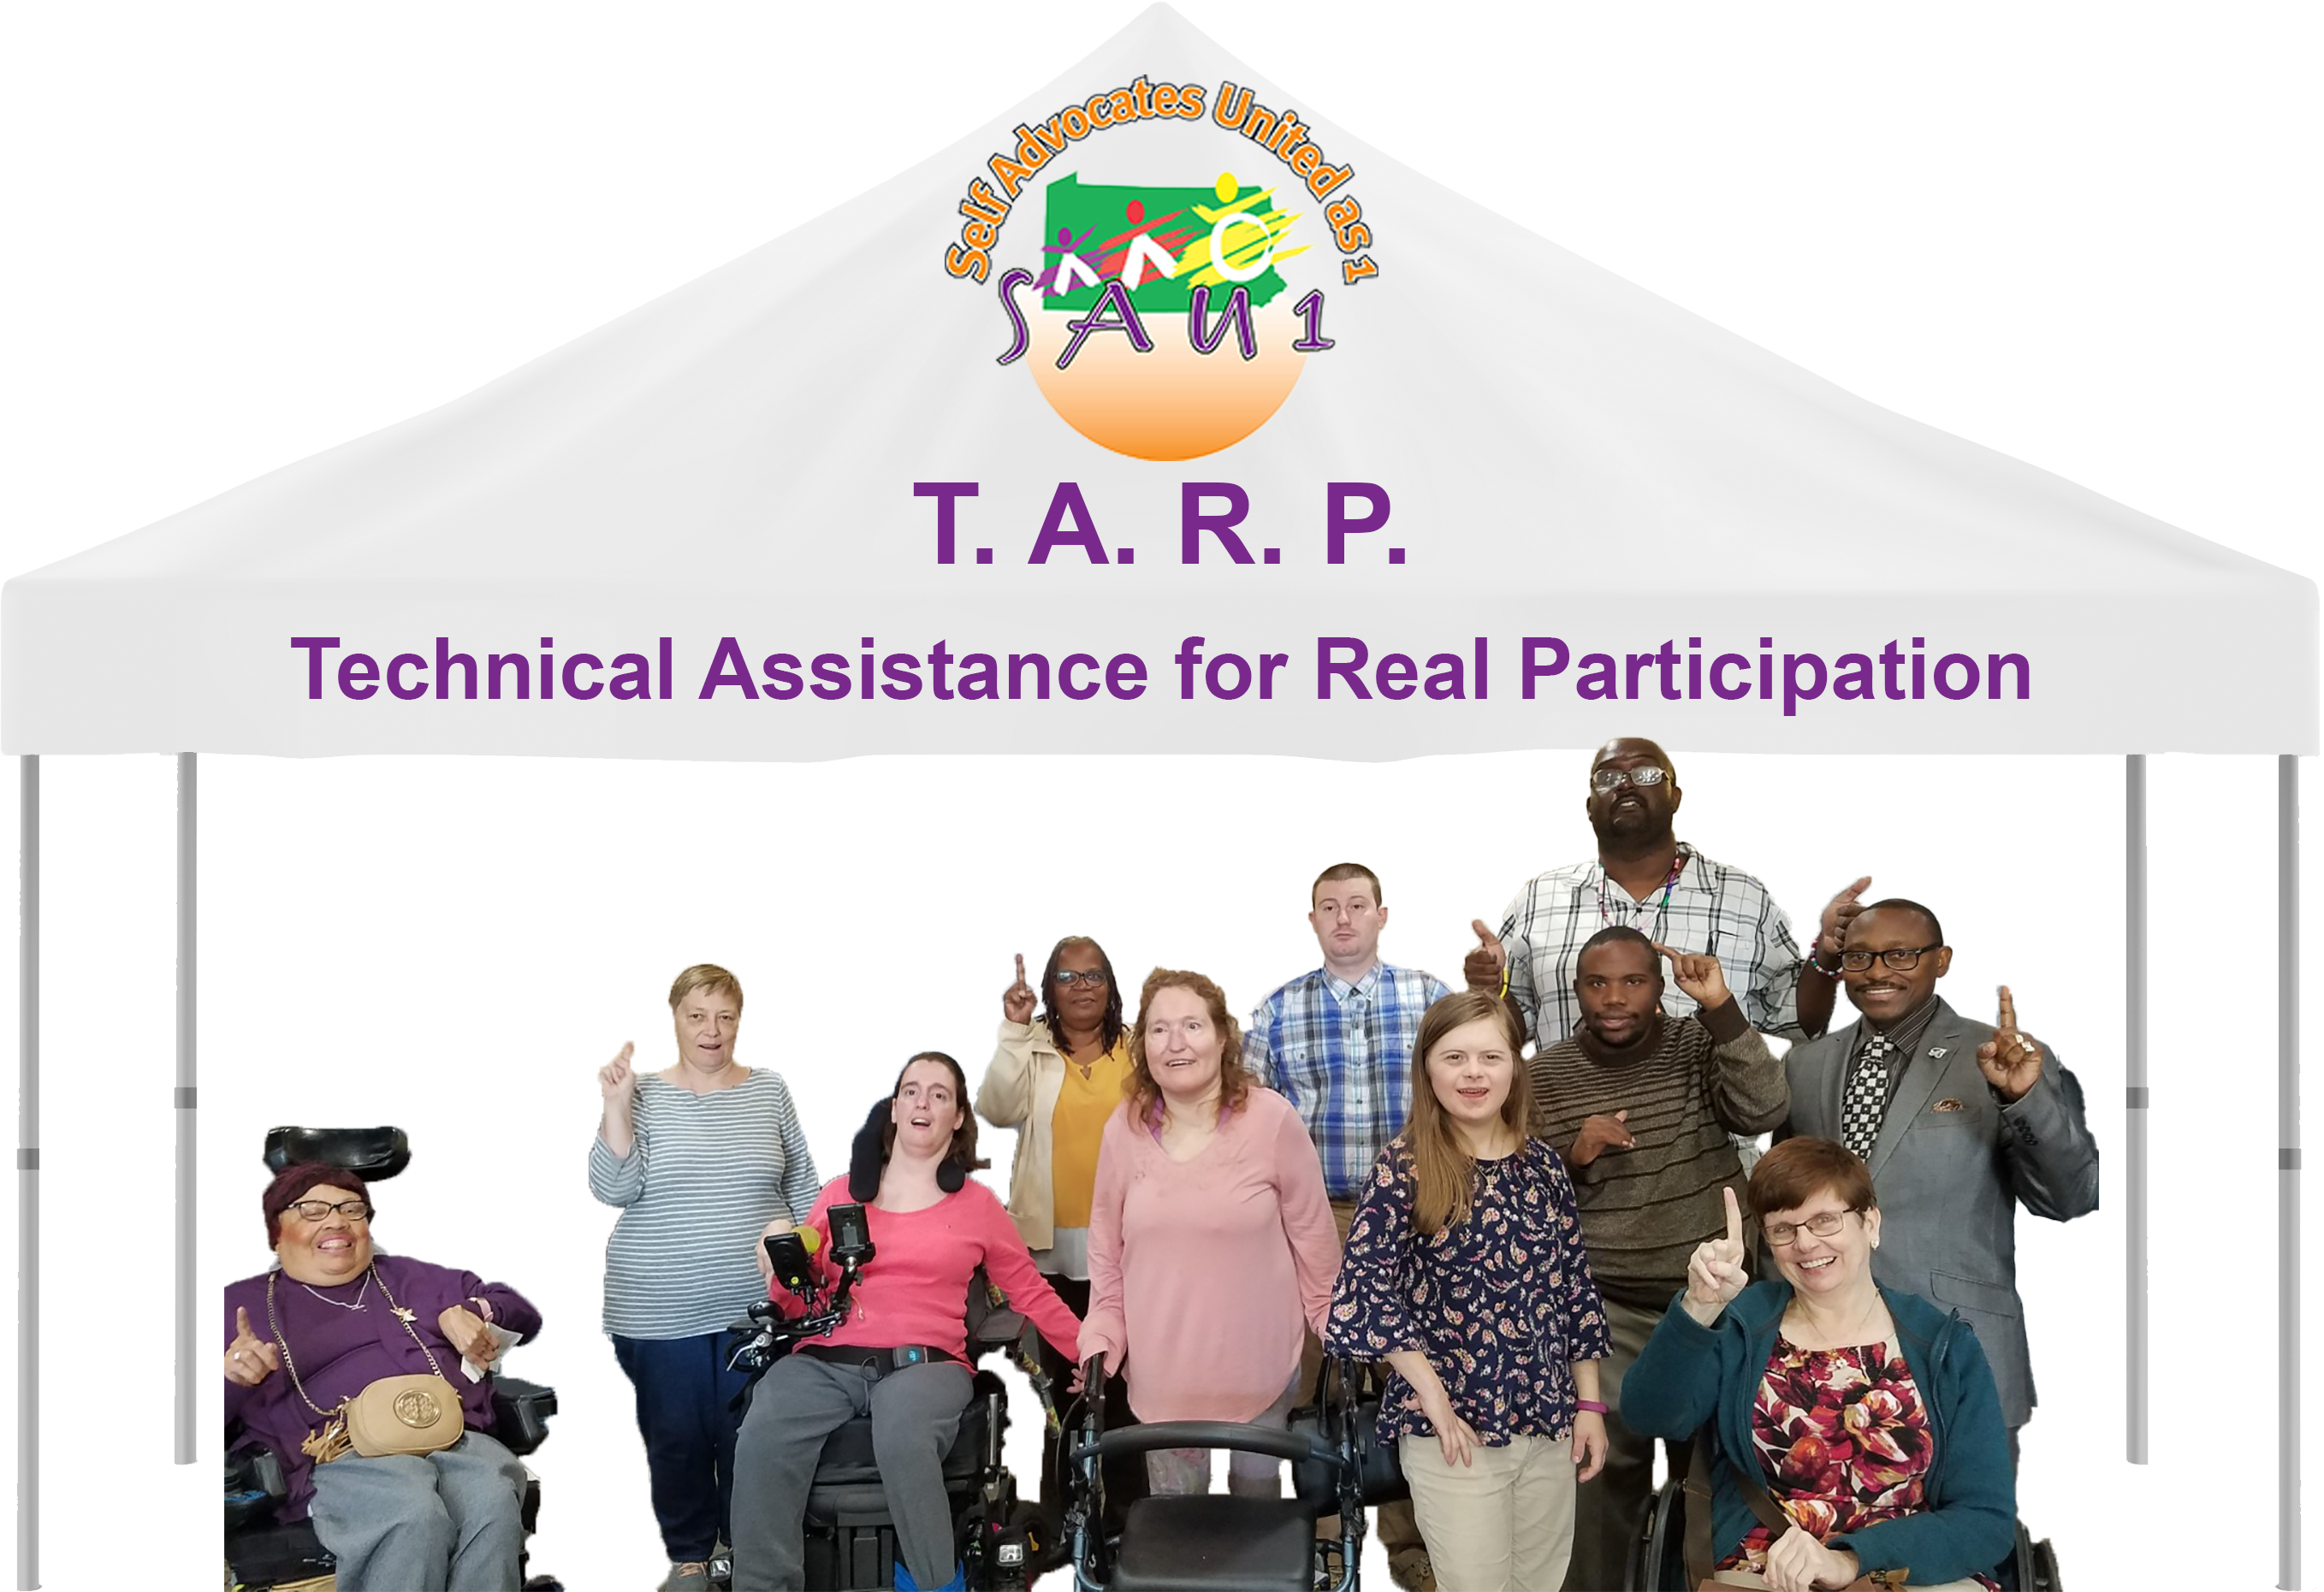 A group of smiling people with fingers raised to show they are united as 1, some standing, others using wheelchairs., under a tent with the Self Advocates United as 1 logo and purple text on it that says T. A. R. P. Technical Assistance for Real Participation..